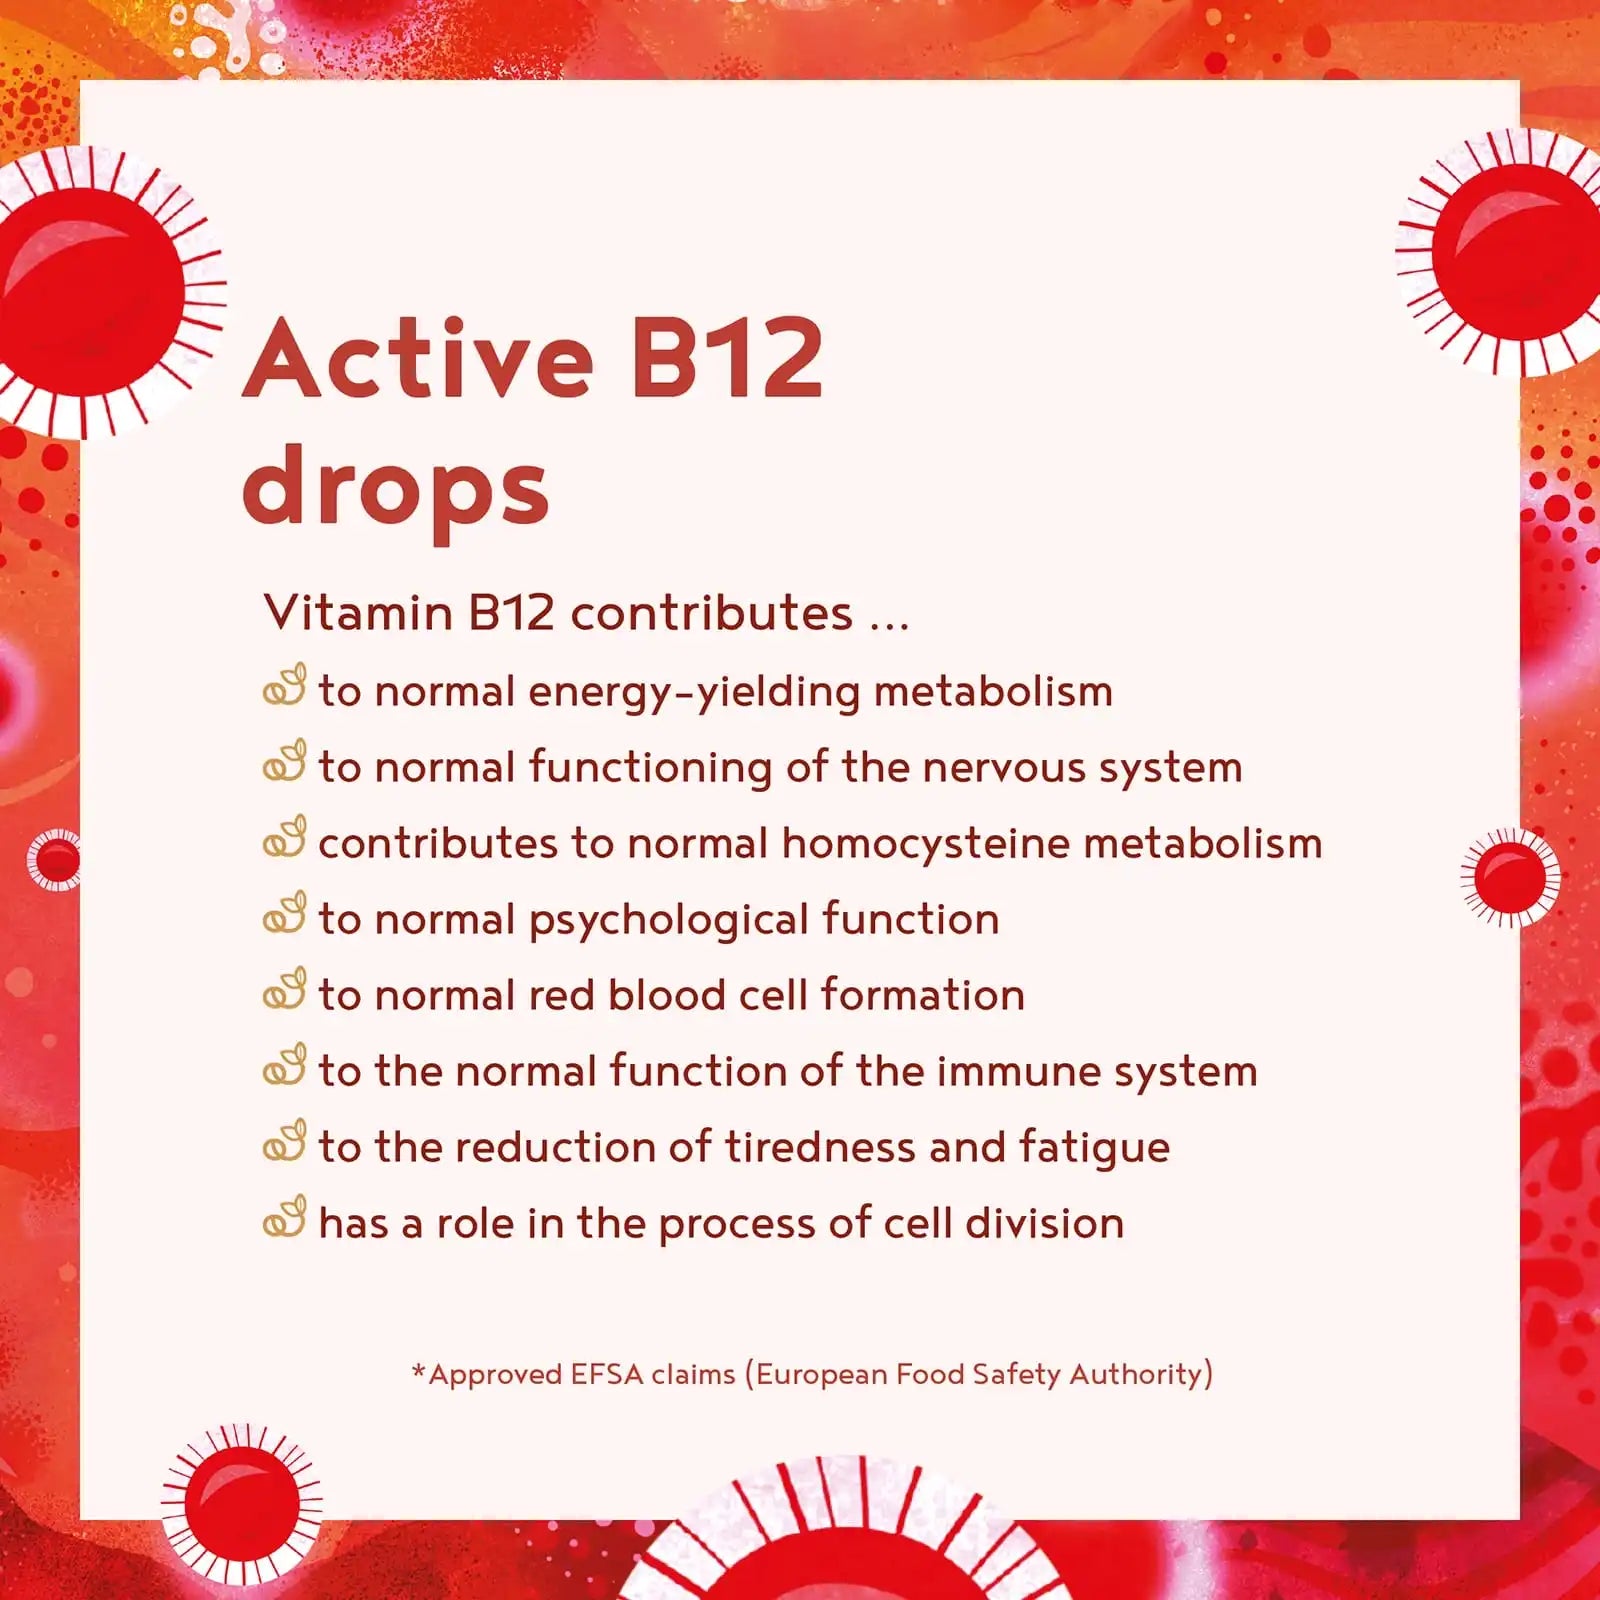 A+ One - Active B12